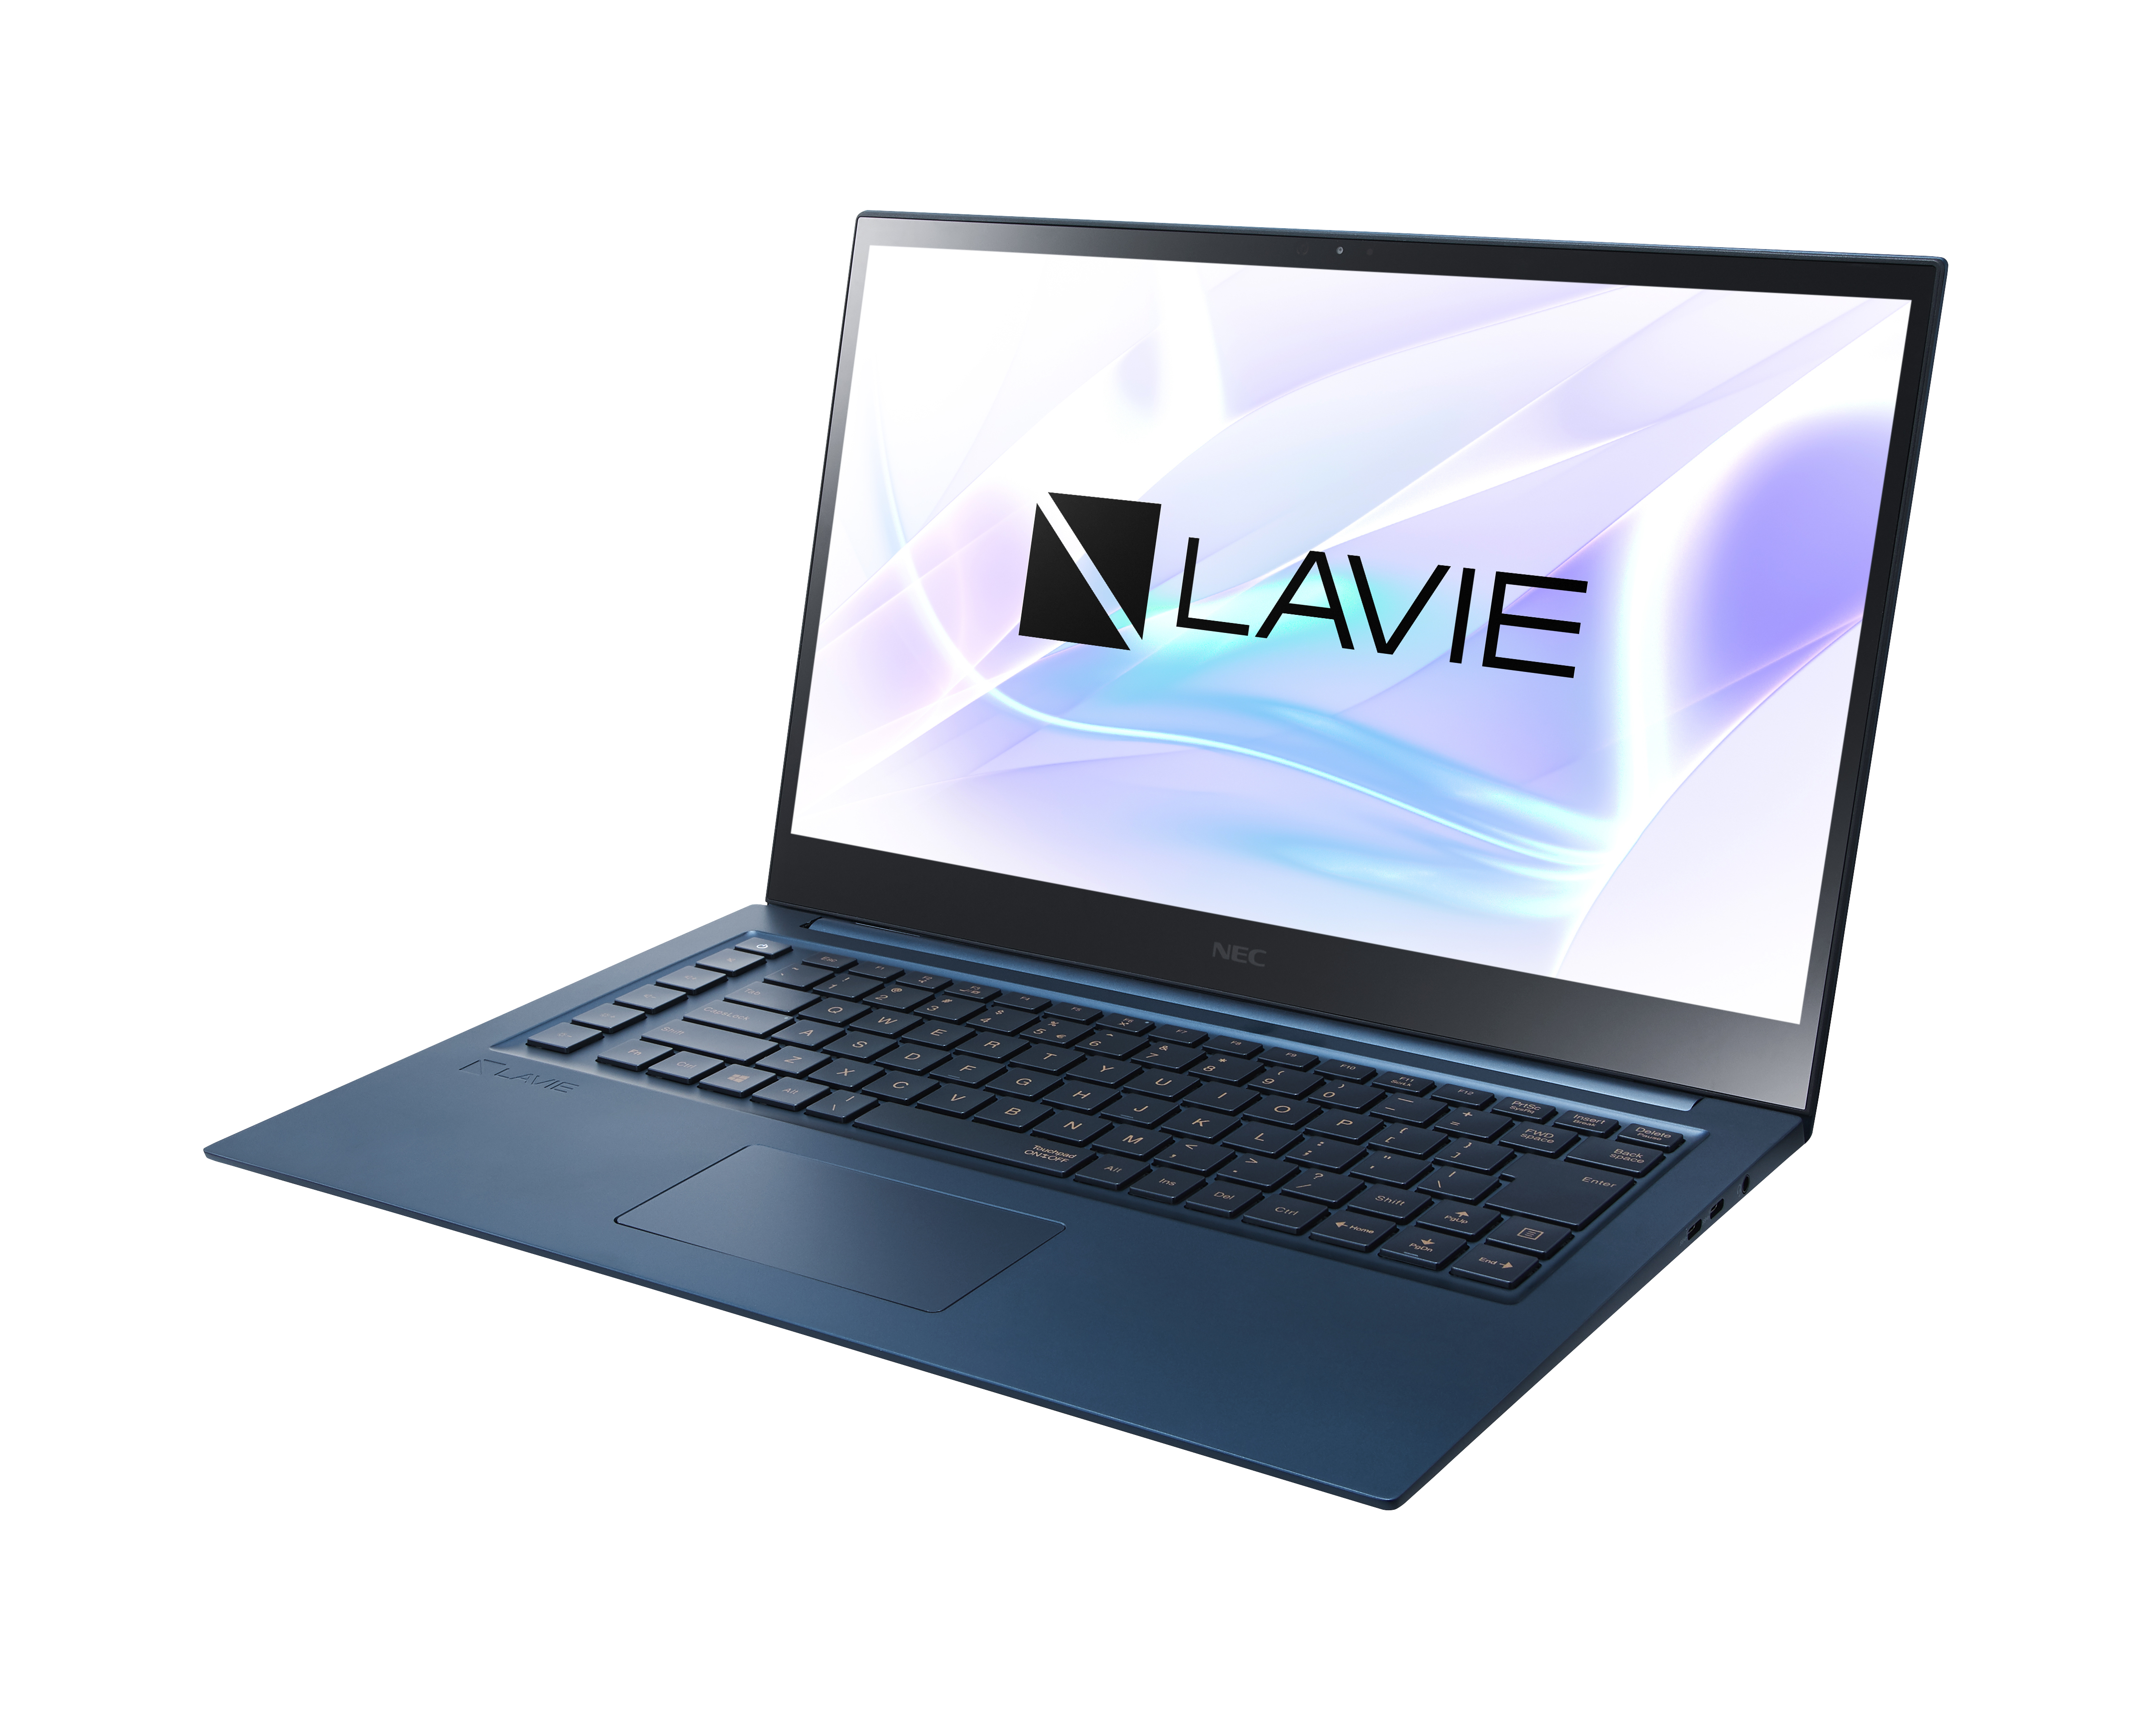 The NEC Lavie Vega is a thin-and-light 4K laptop aimed at business 